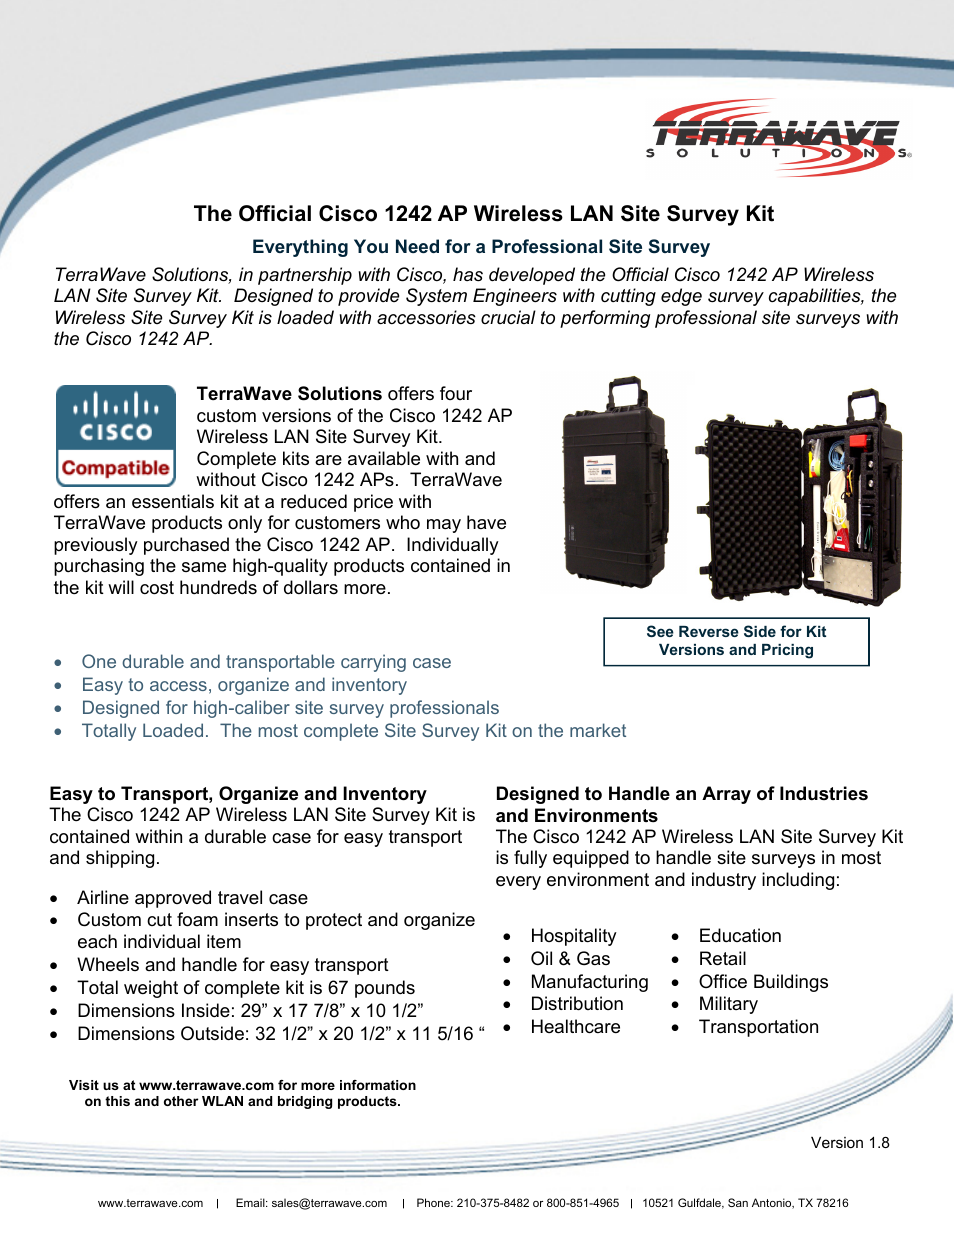 Essentials Site Survey Kit with TerraWave Products Only